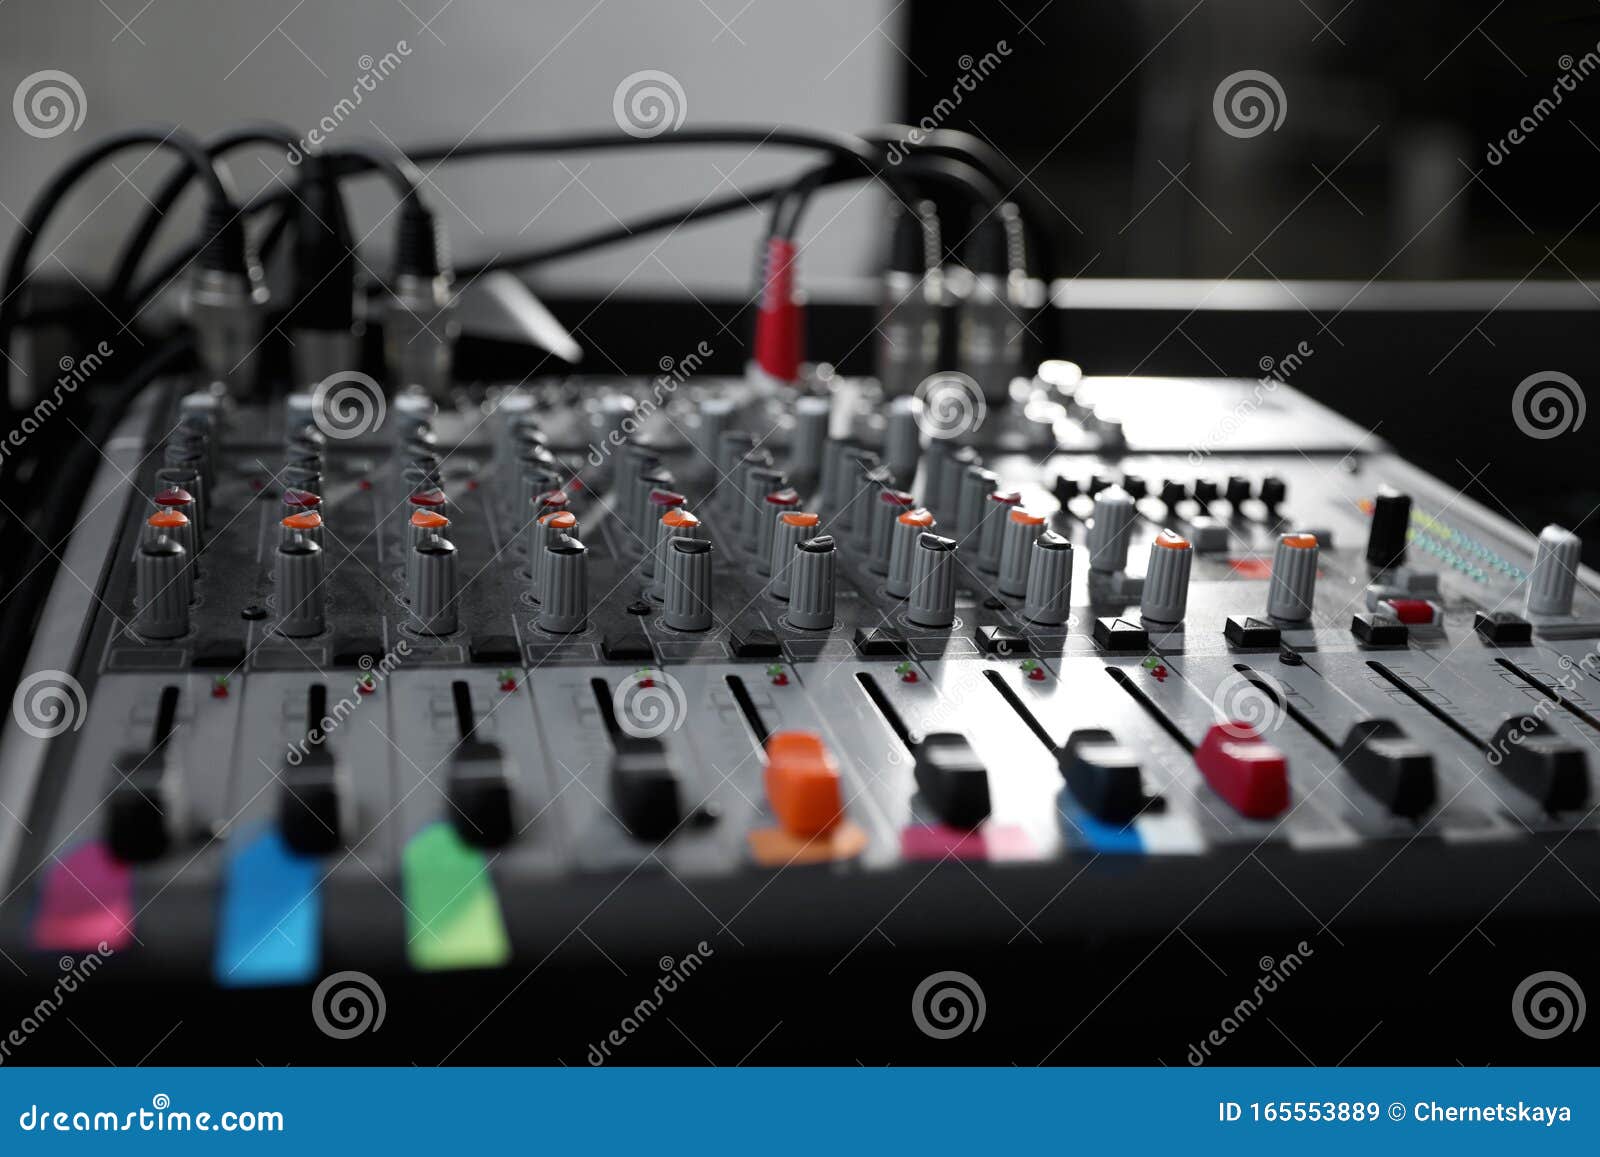 Music Equipment Stock Photos - Download 142,781 Royalty Free Photos